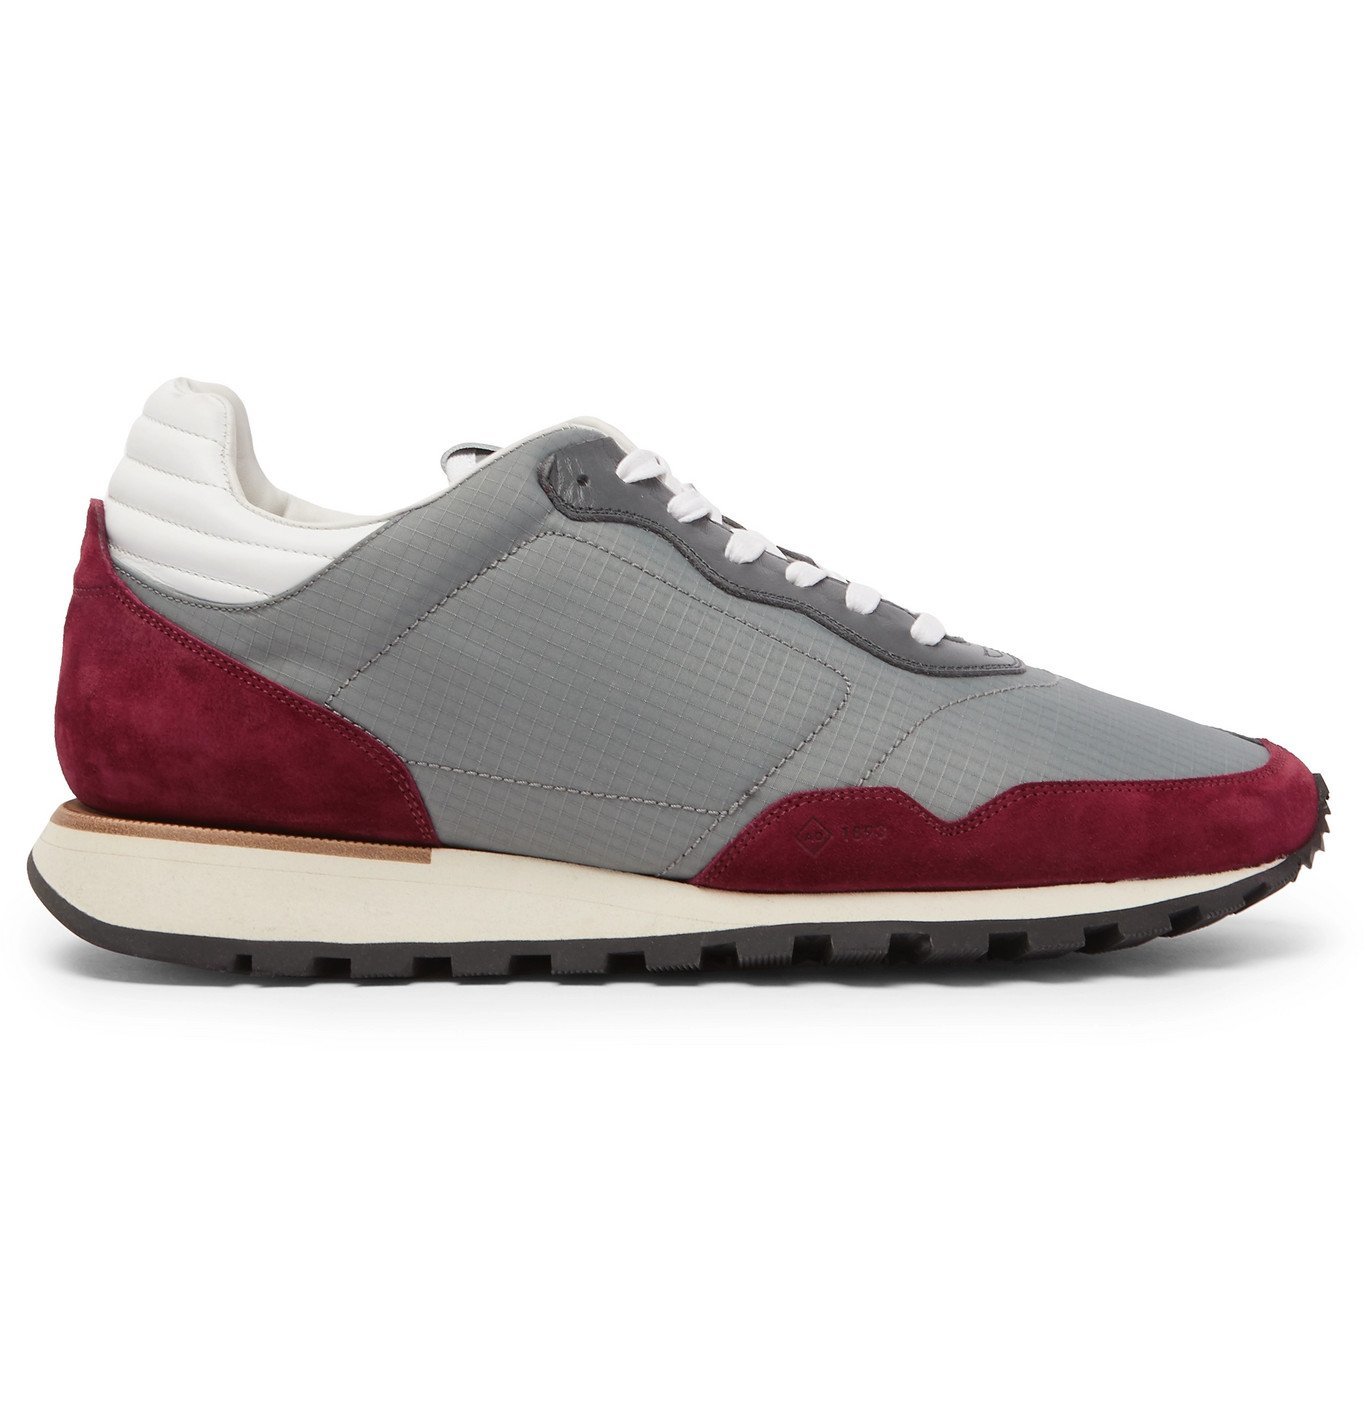 Dunhill - Axis Ripstop, Suede and Leather Sneakers - Gray Dunhill